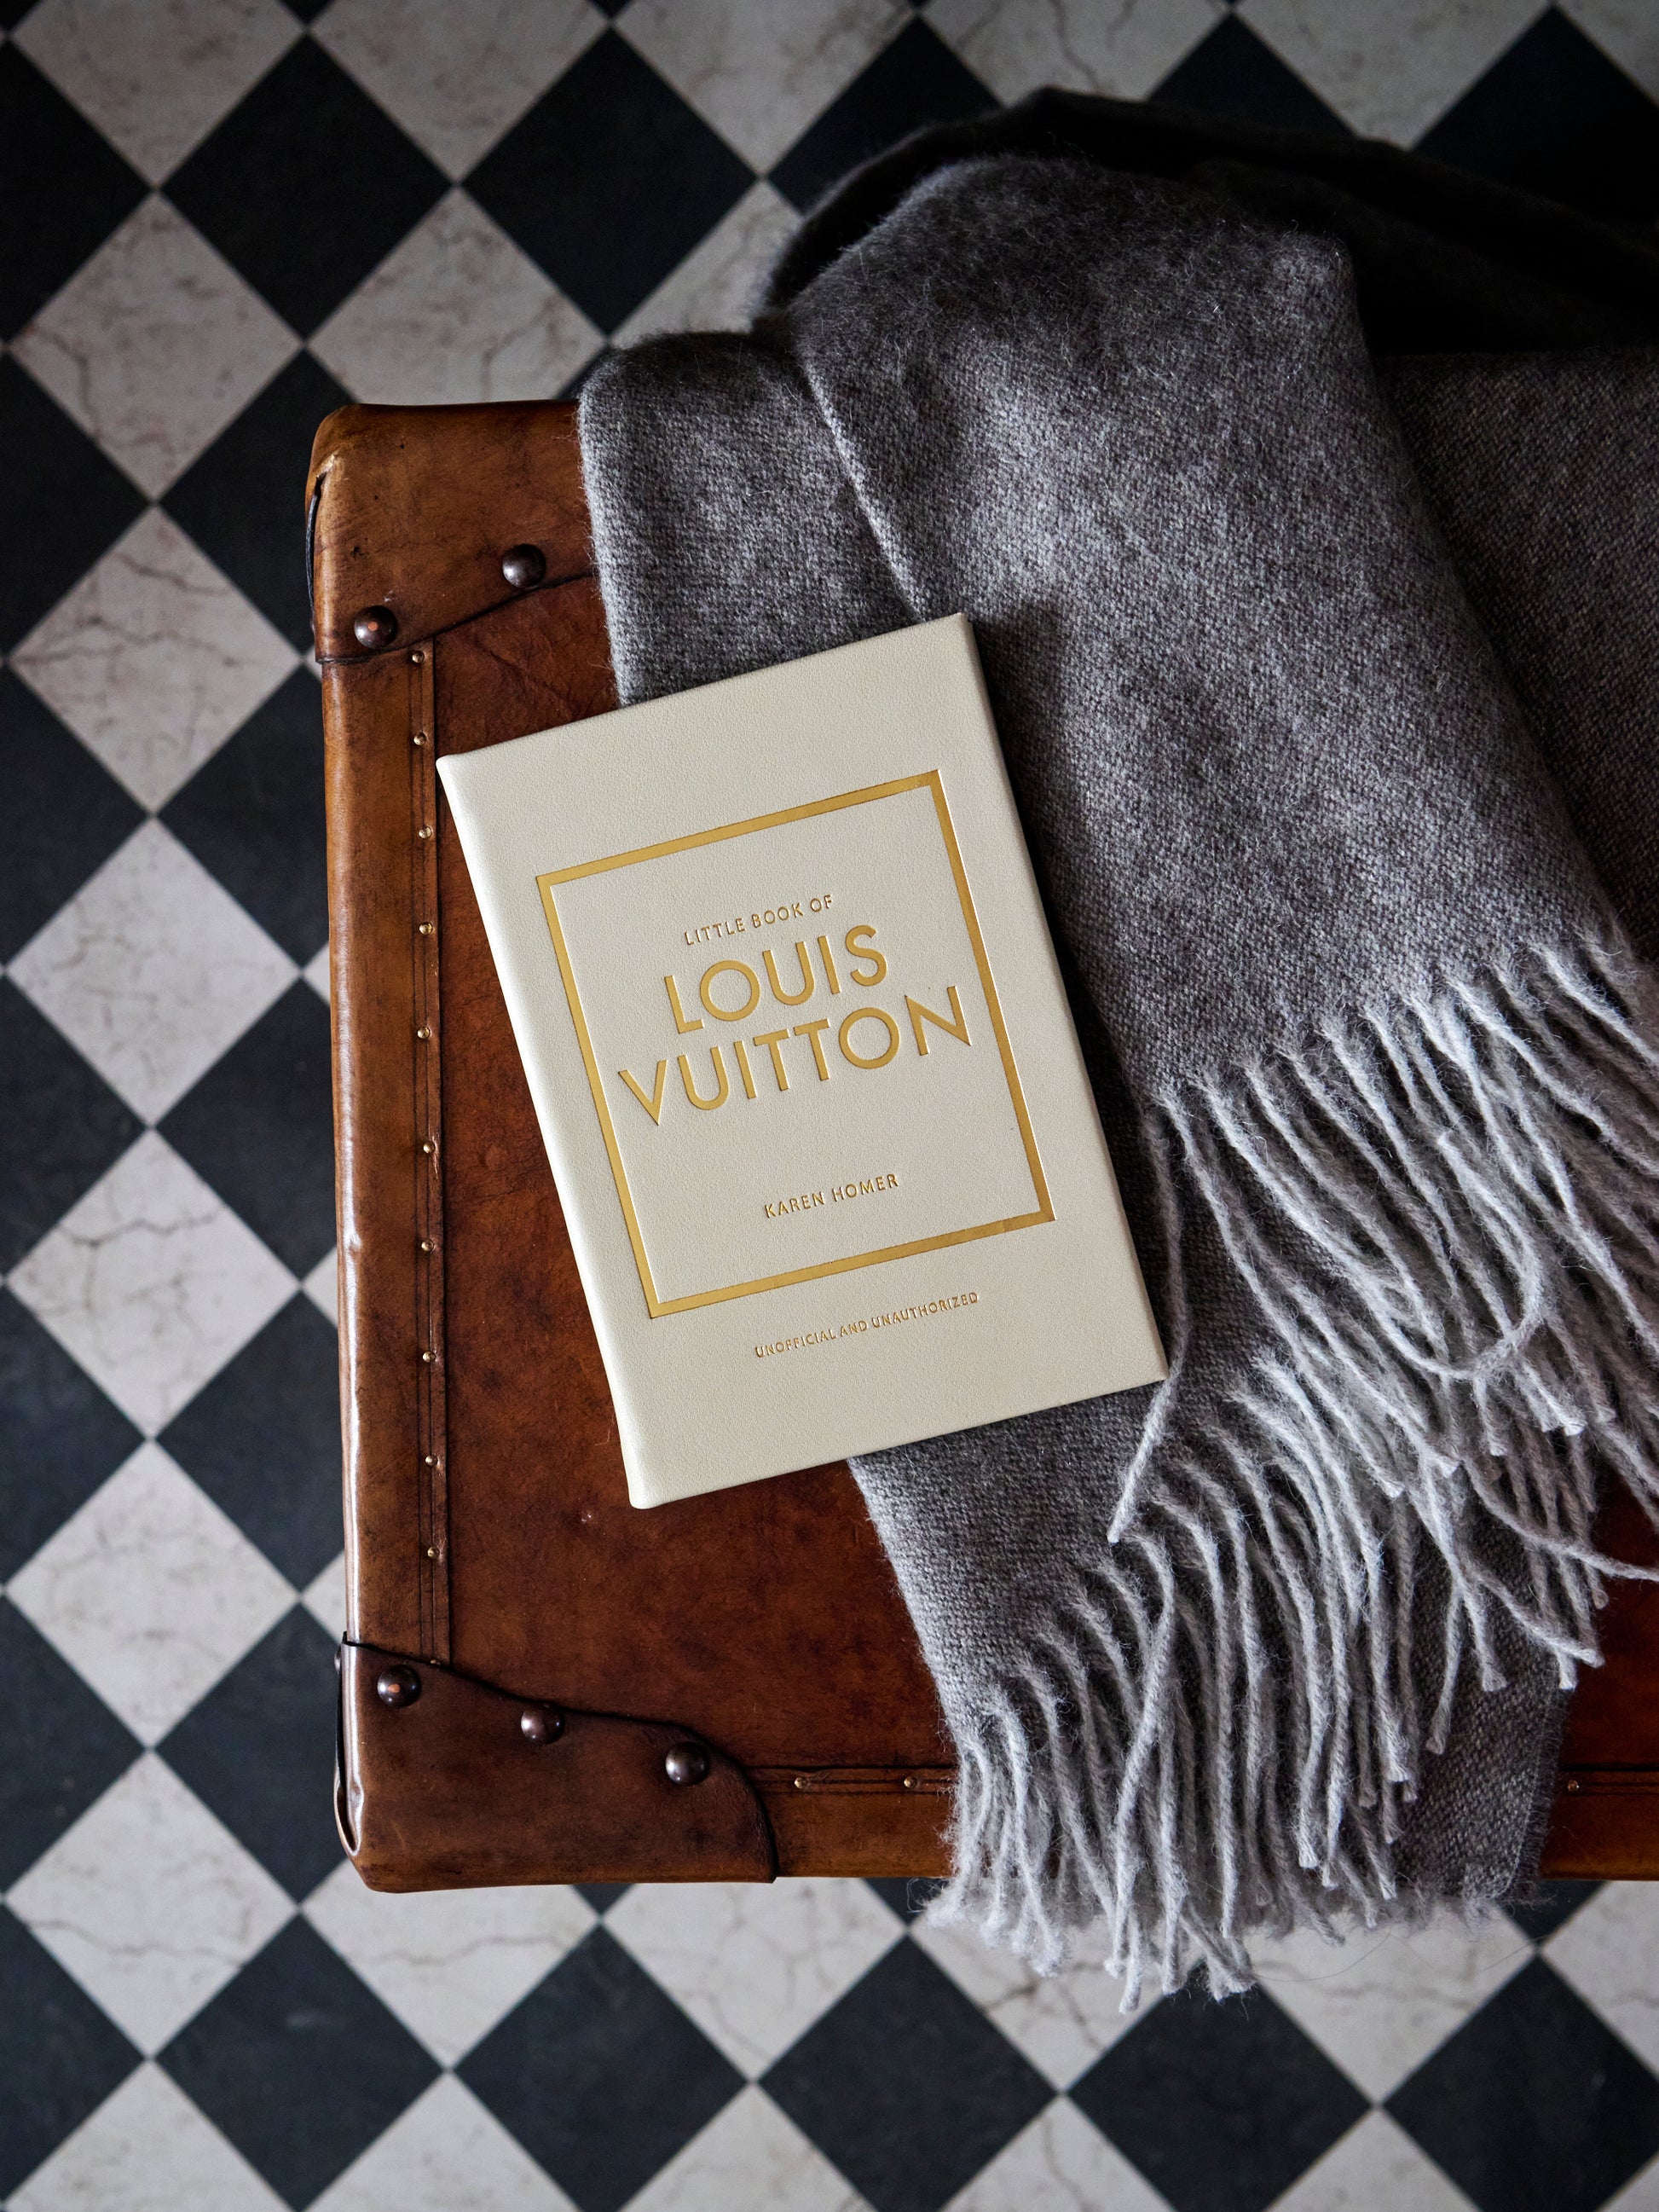 Shop the Little Book of Louis Vuitton Leather Bound Edition at